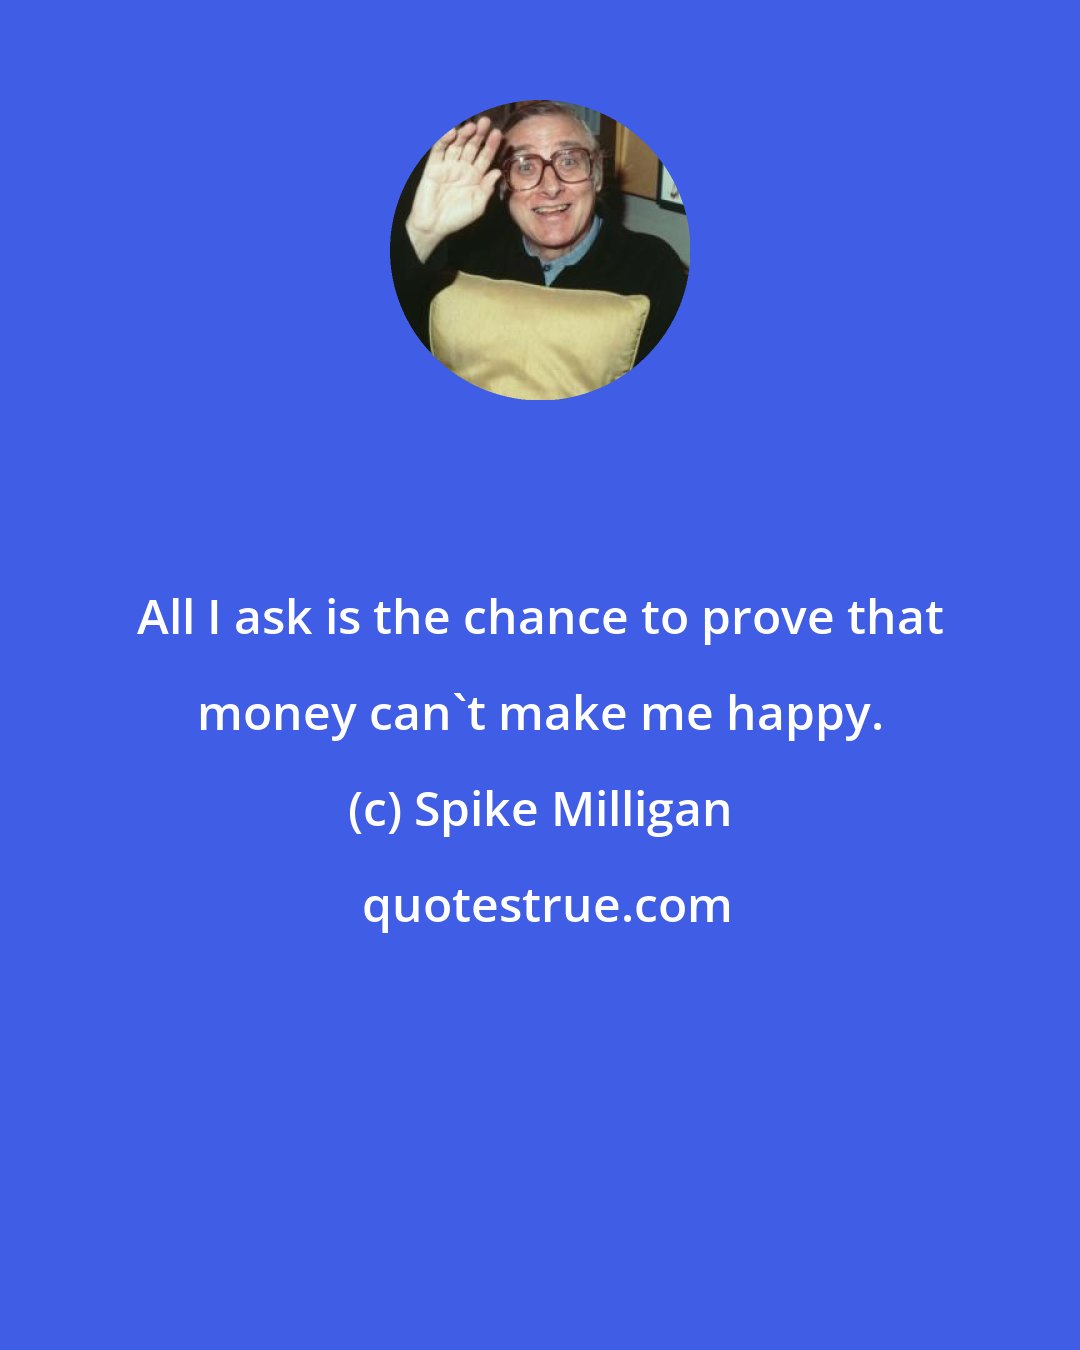 Spike Milligan: All I ask is the chance to prove that money can't make me happy.